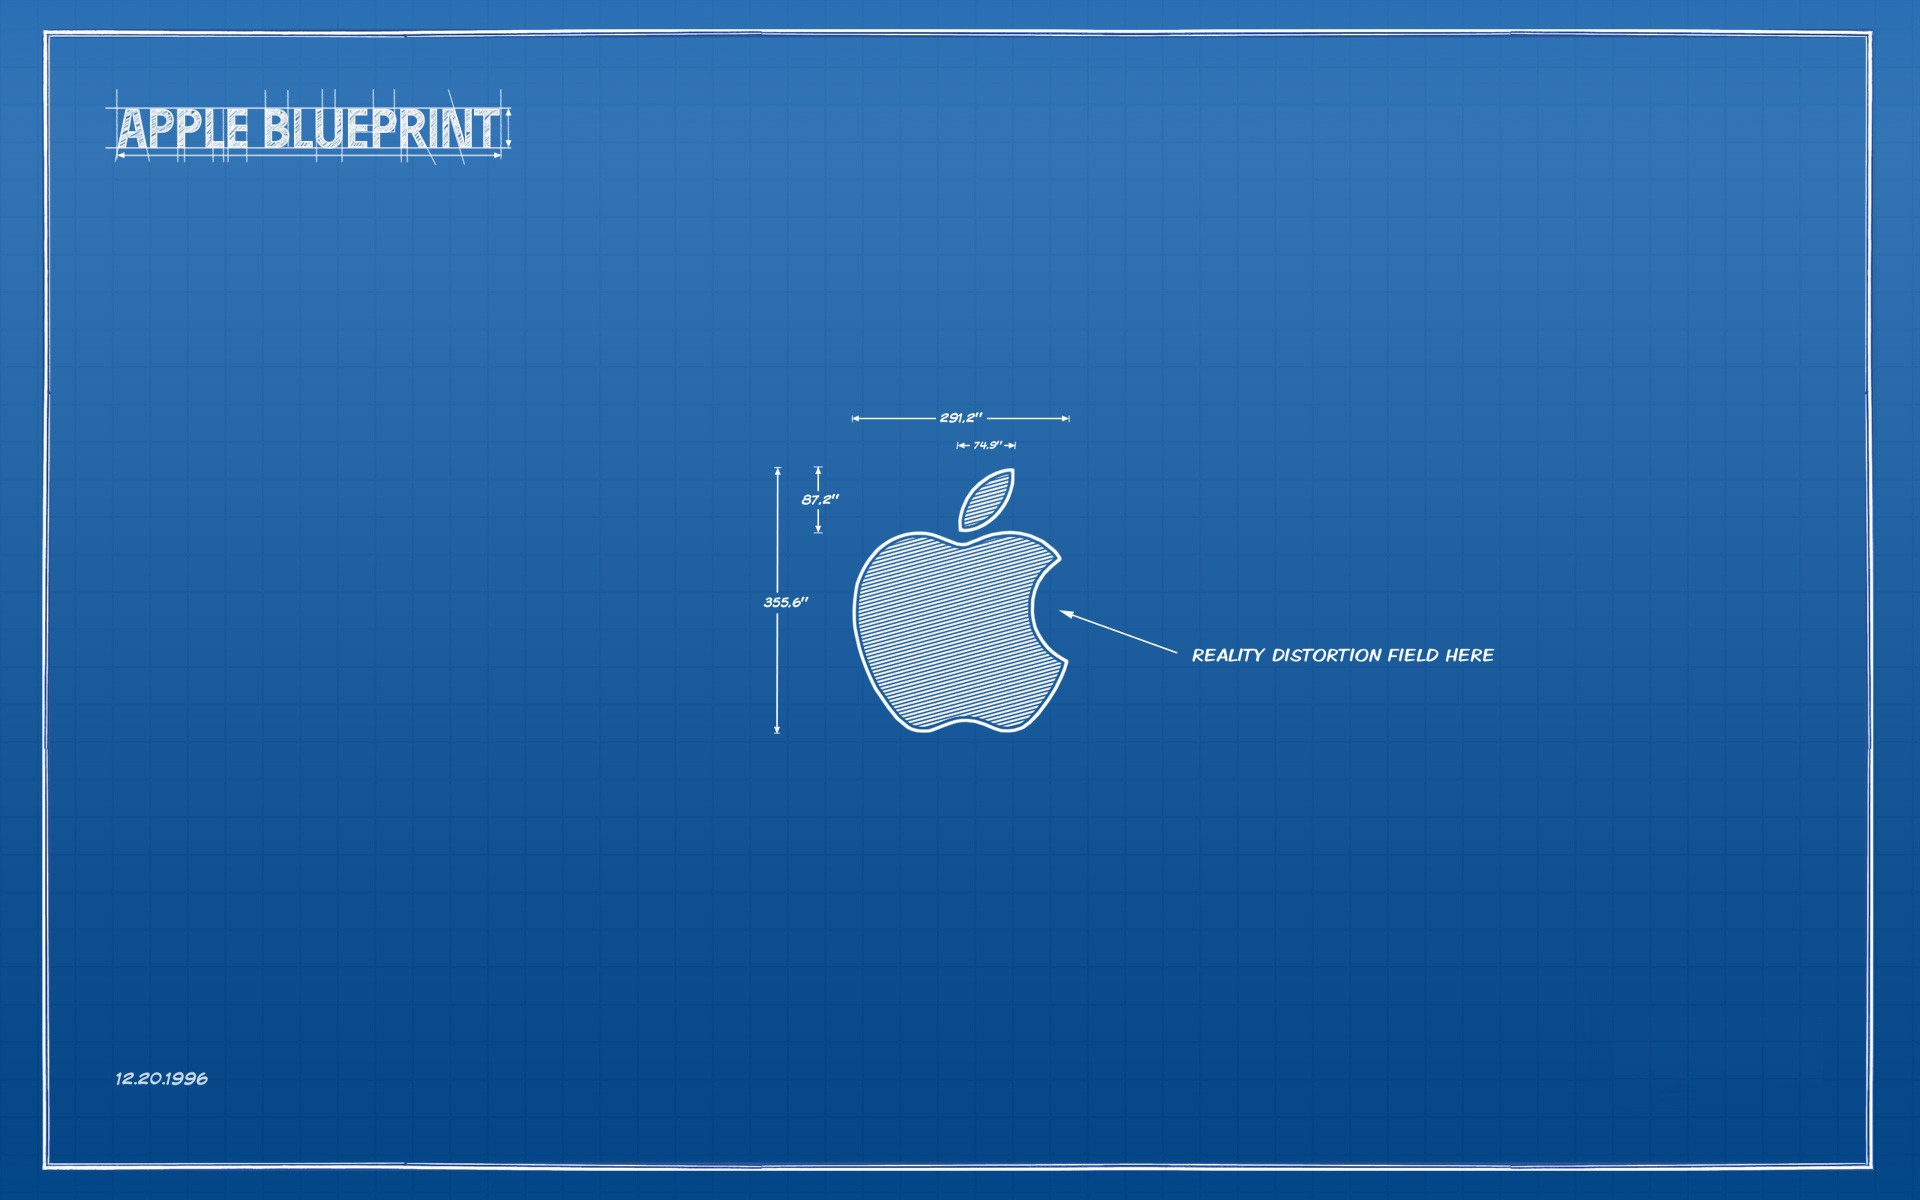 Apple Blueprint Wallpaper And Image Pictures Photos